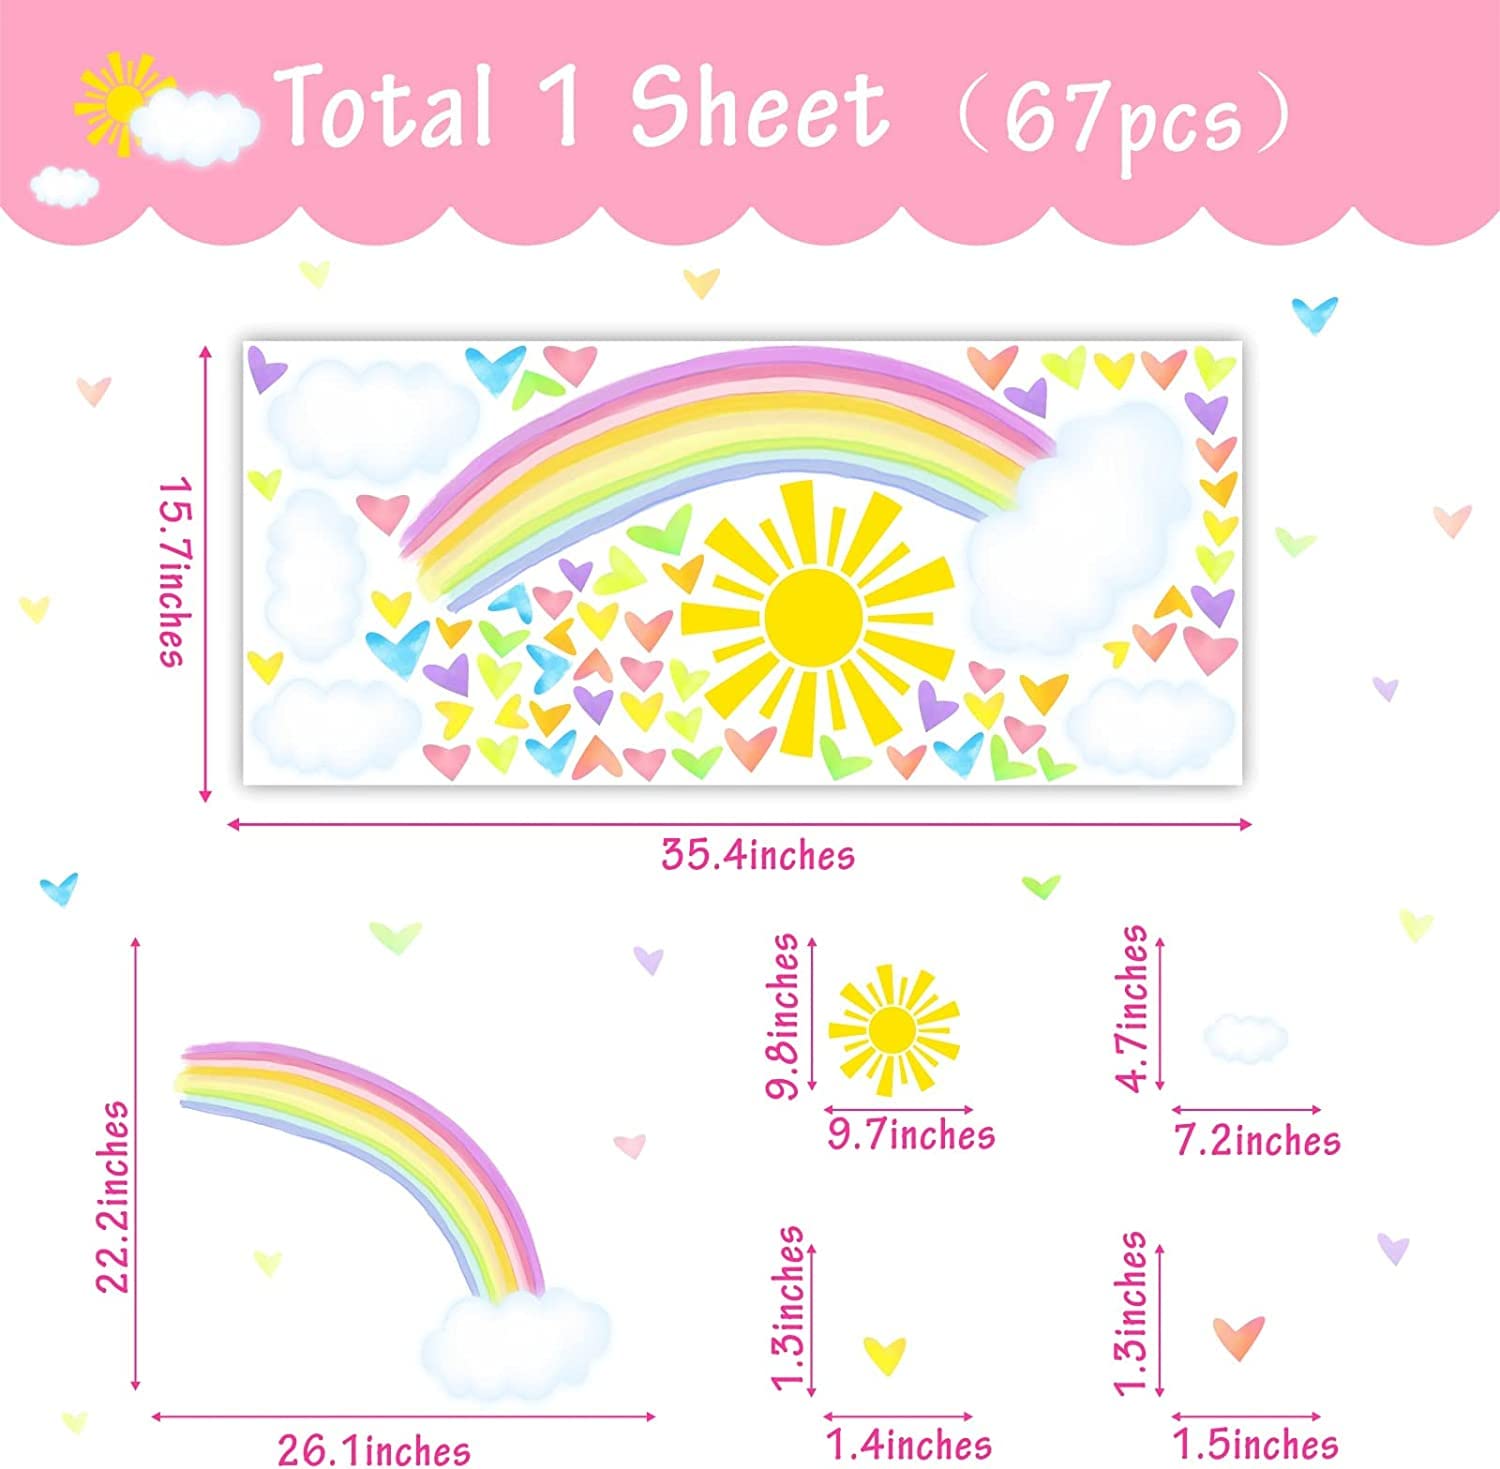 Colorful Rainbow Wall Decals Sun Cloud Wall Decals Colorful Heart Wall Stickers Watercolor Yellow Sun Decal Large Rainbow Wall Stickers for Girls Room Kids Bedroom Nursery Decor